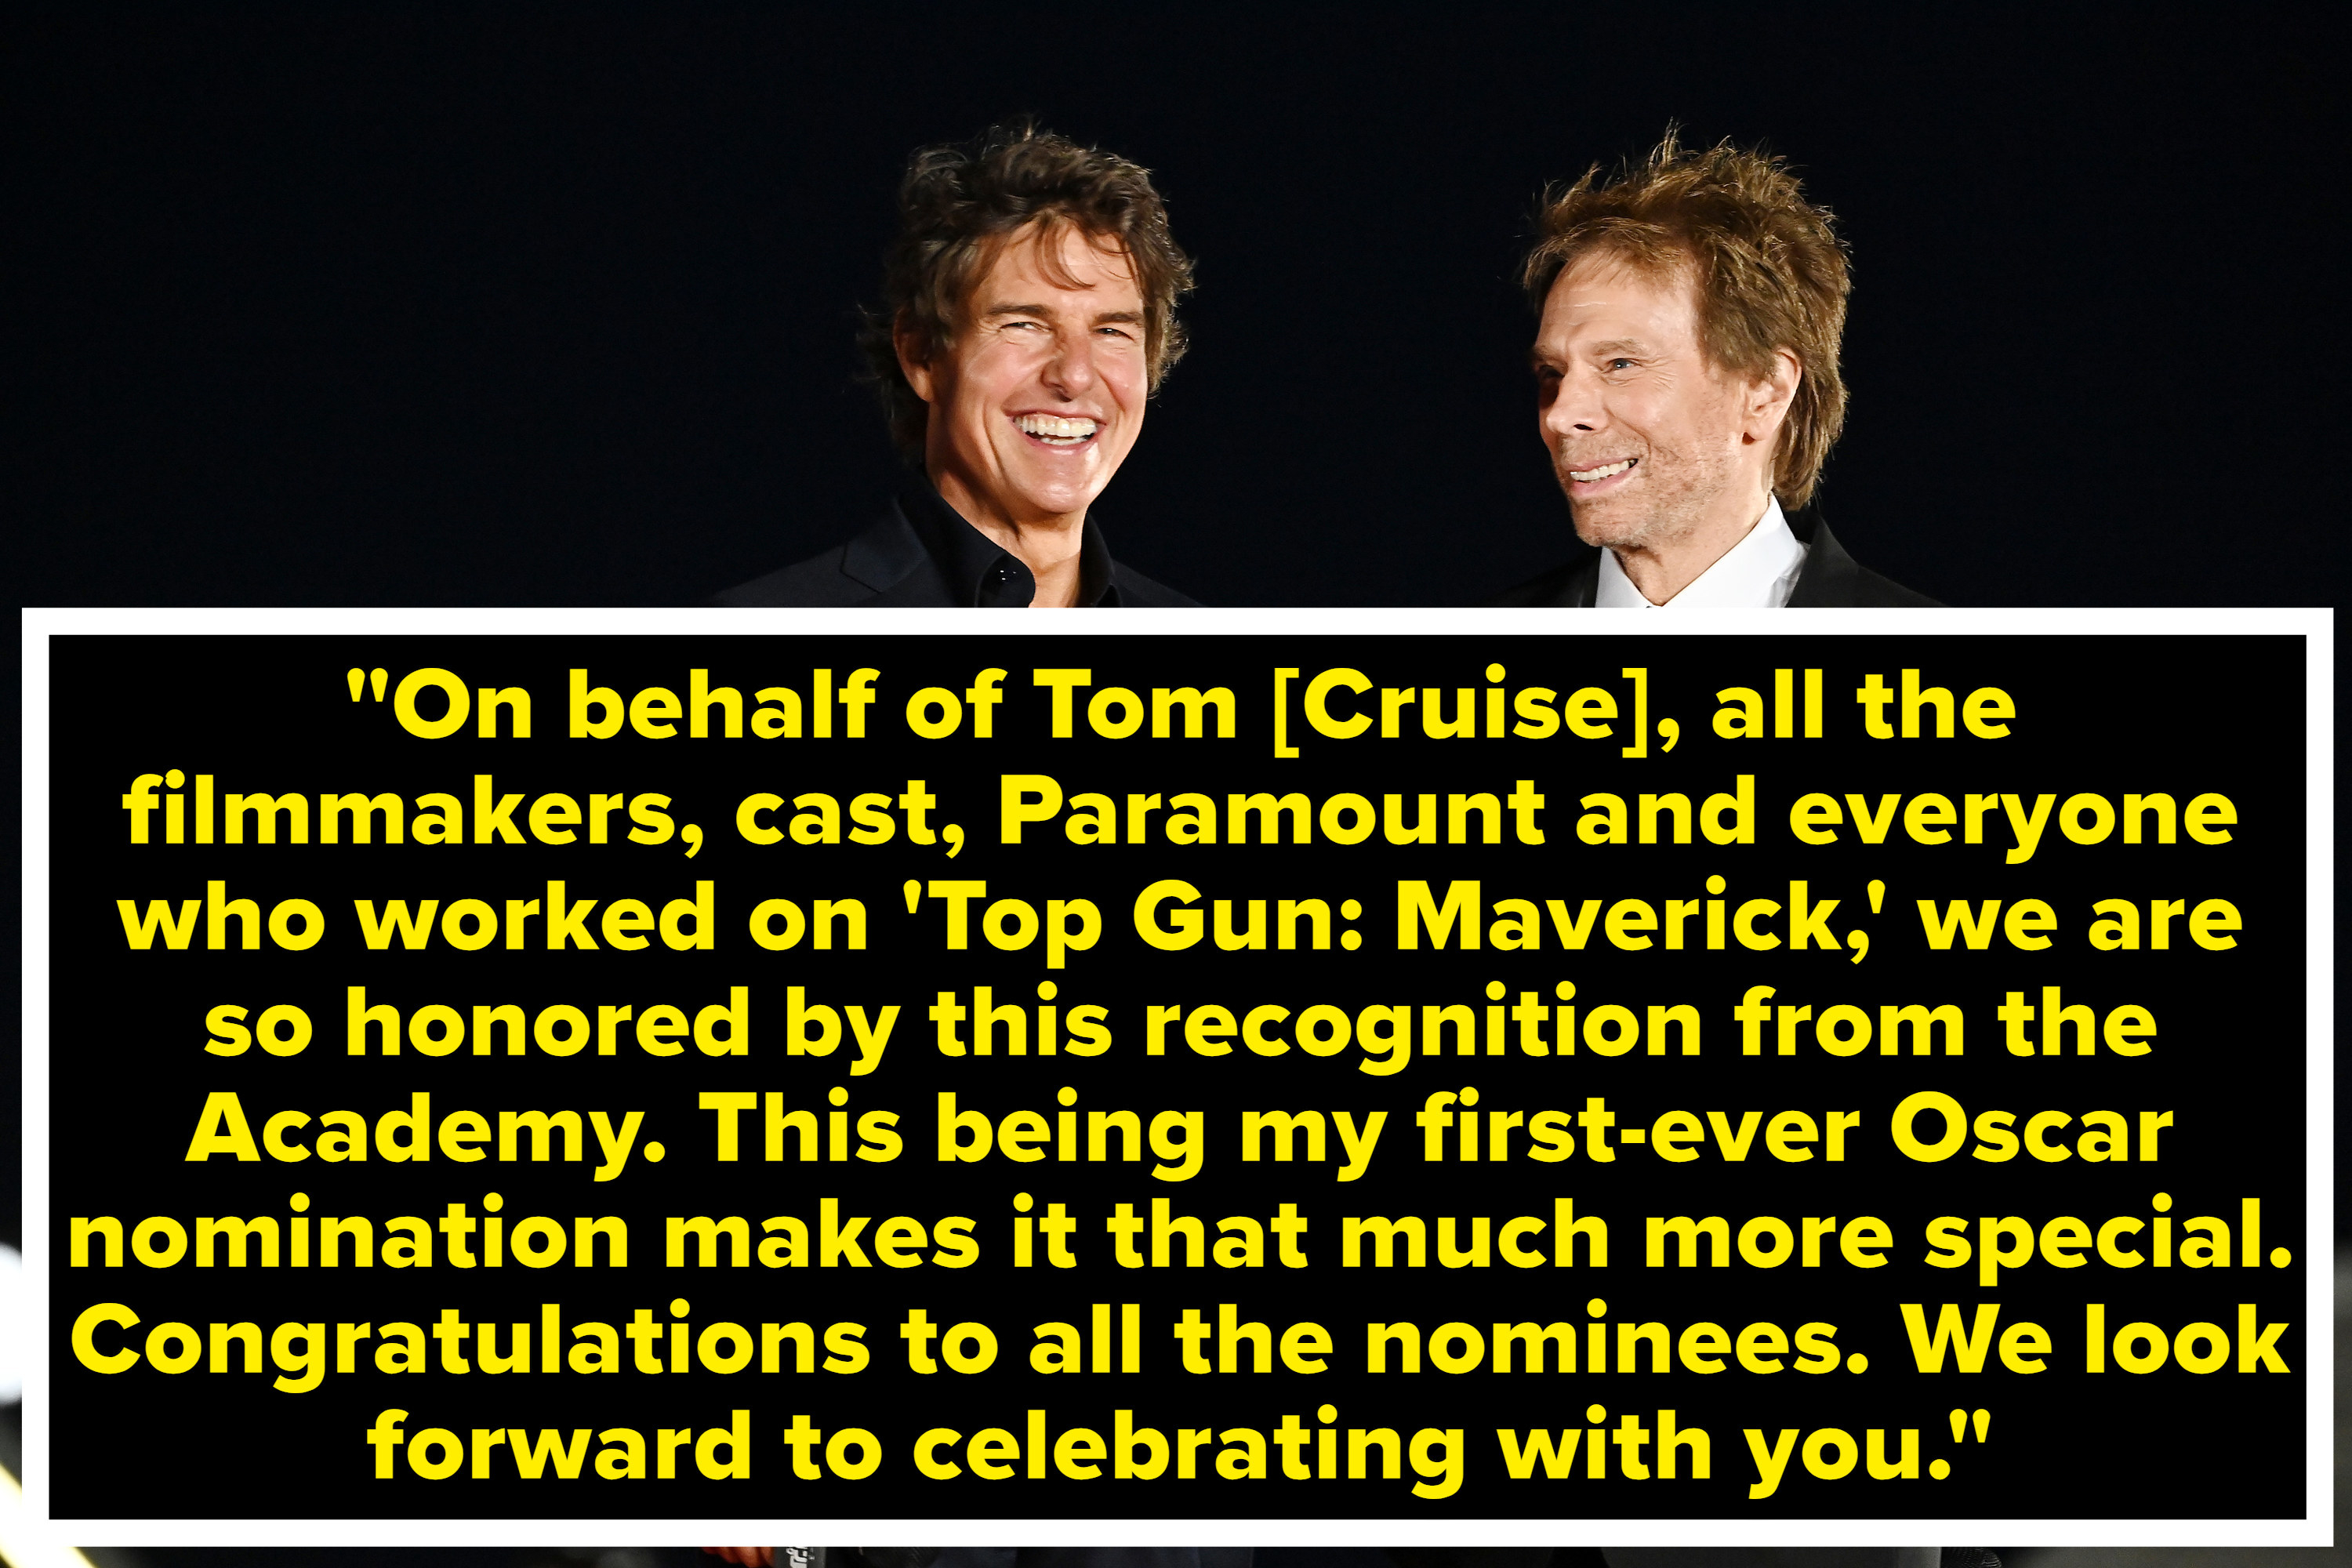 On behalf of Tom [Cruise], all the filmmakers, cast, Paramount and everyone who worked on &#x27;&#x27;Top Gun: Maverick,&#x27; we are so honored by this recognition from the Academy&quot;